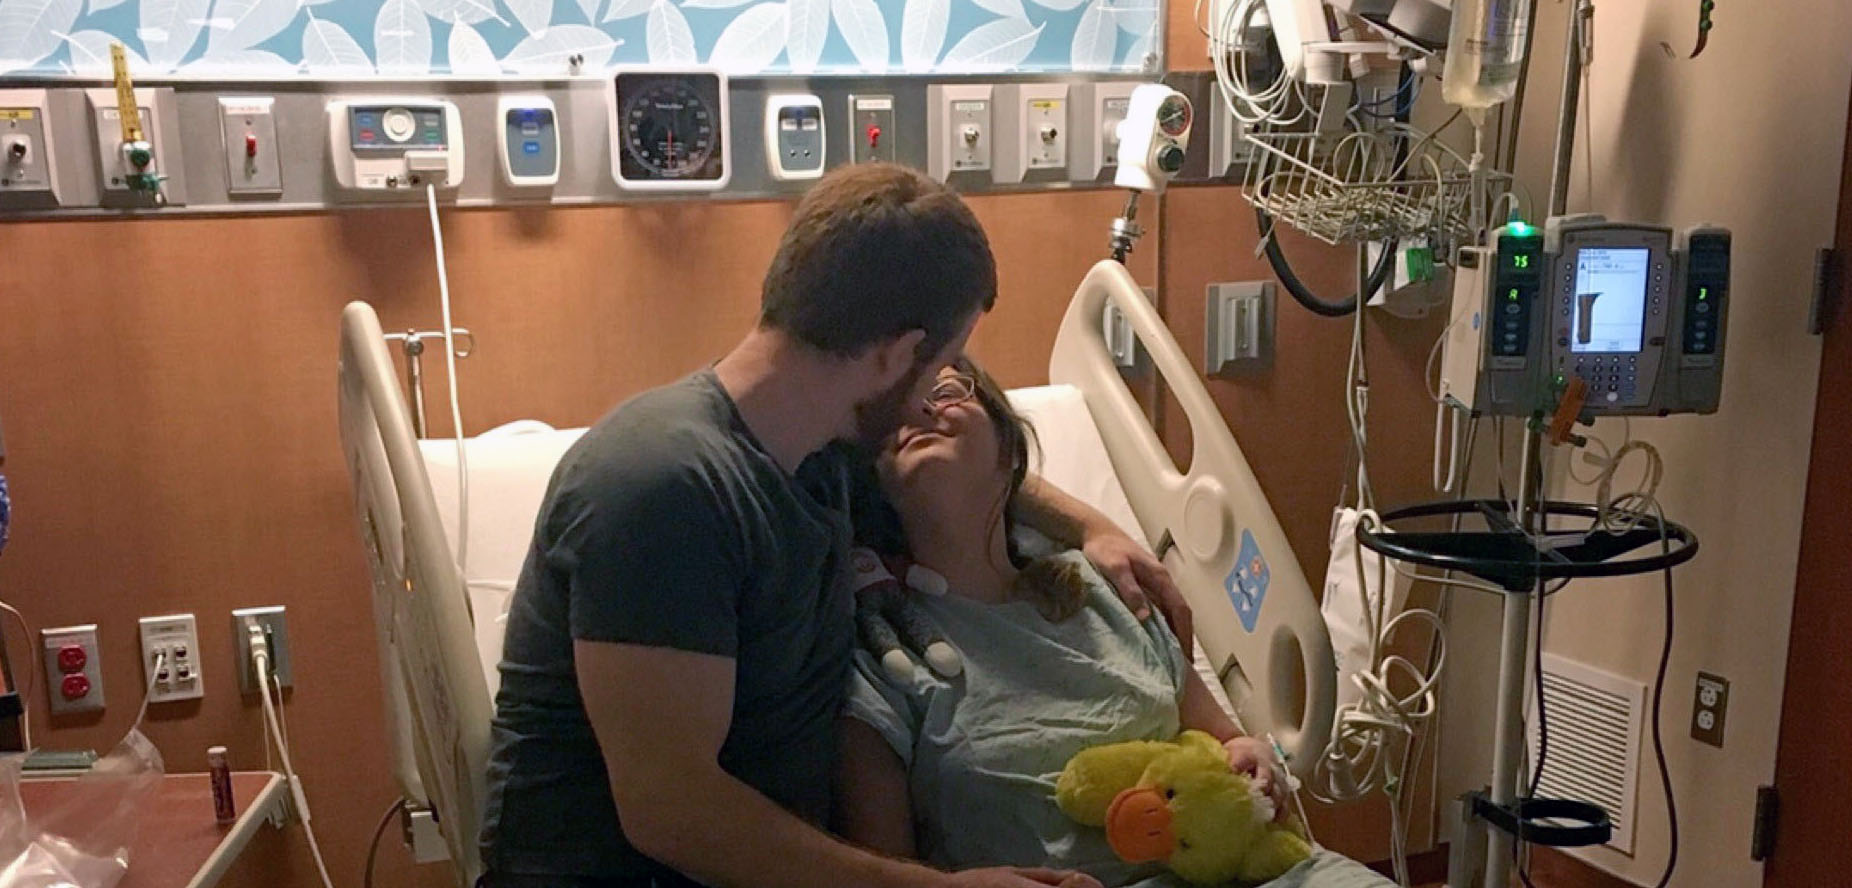 PHOTO: Jake Woodward comforts Lauren O'Malley before her surgery to have a tumor removed from her ovary.